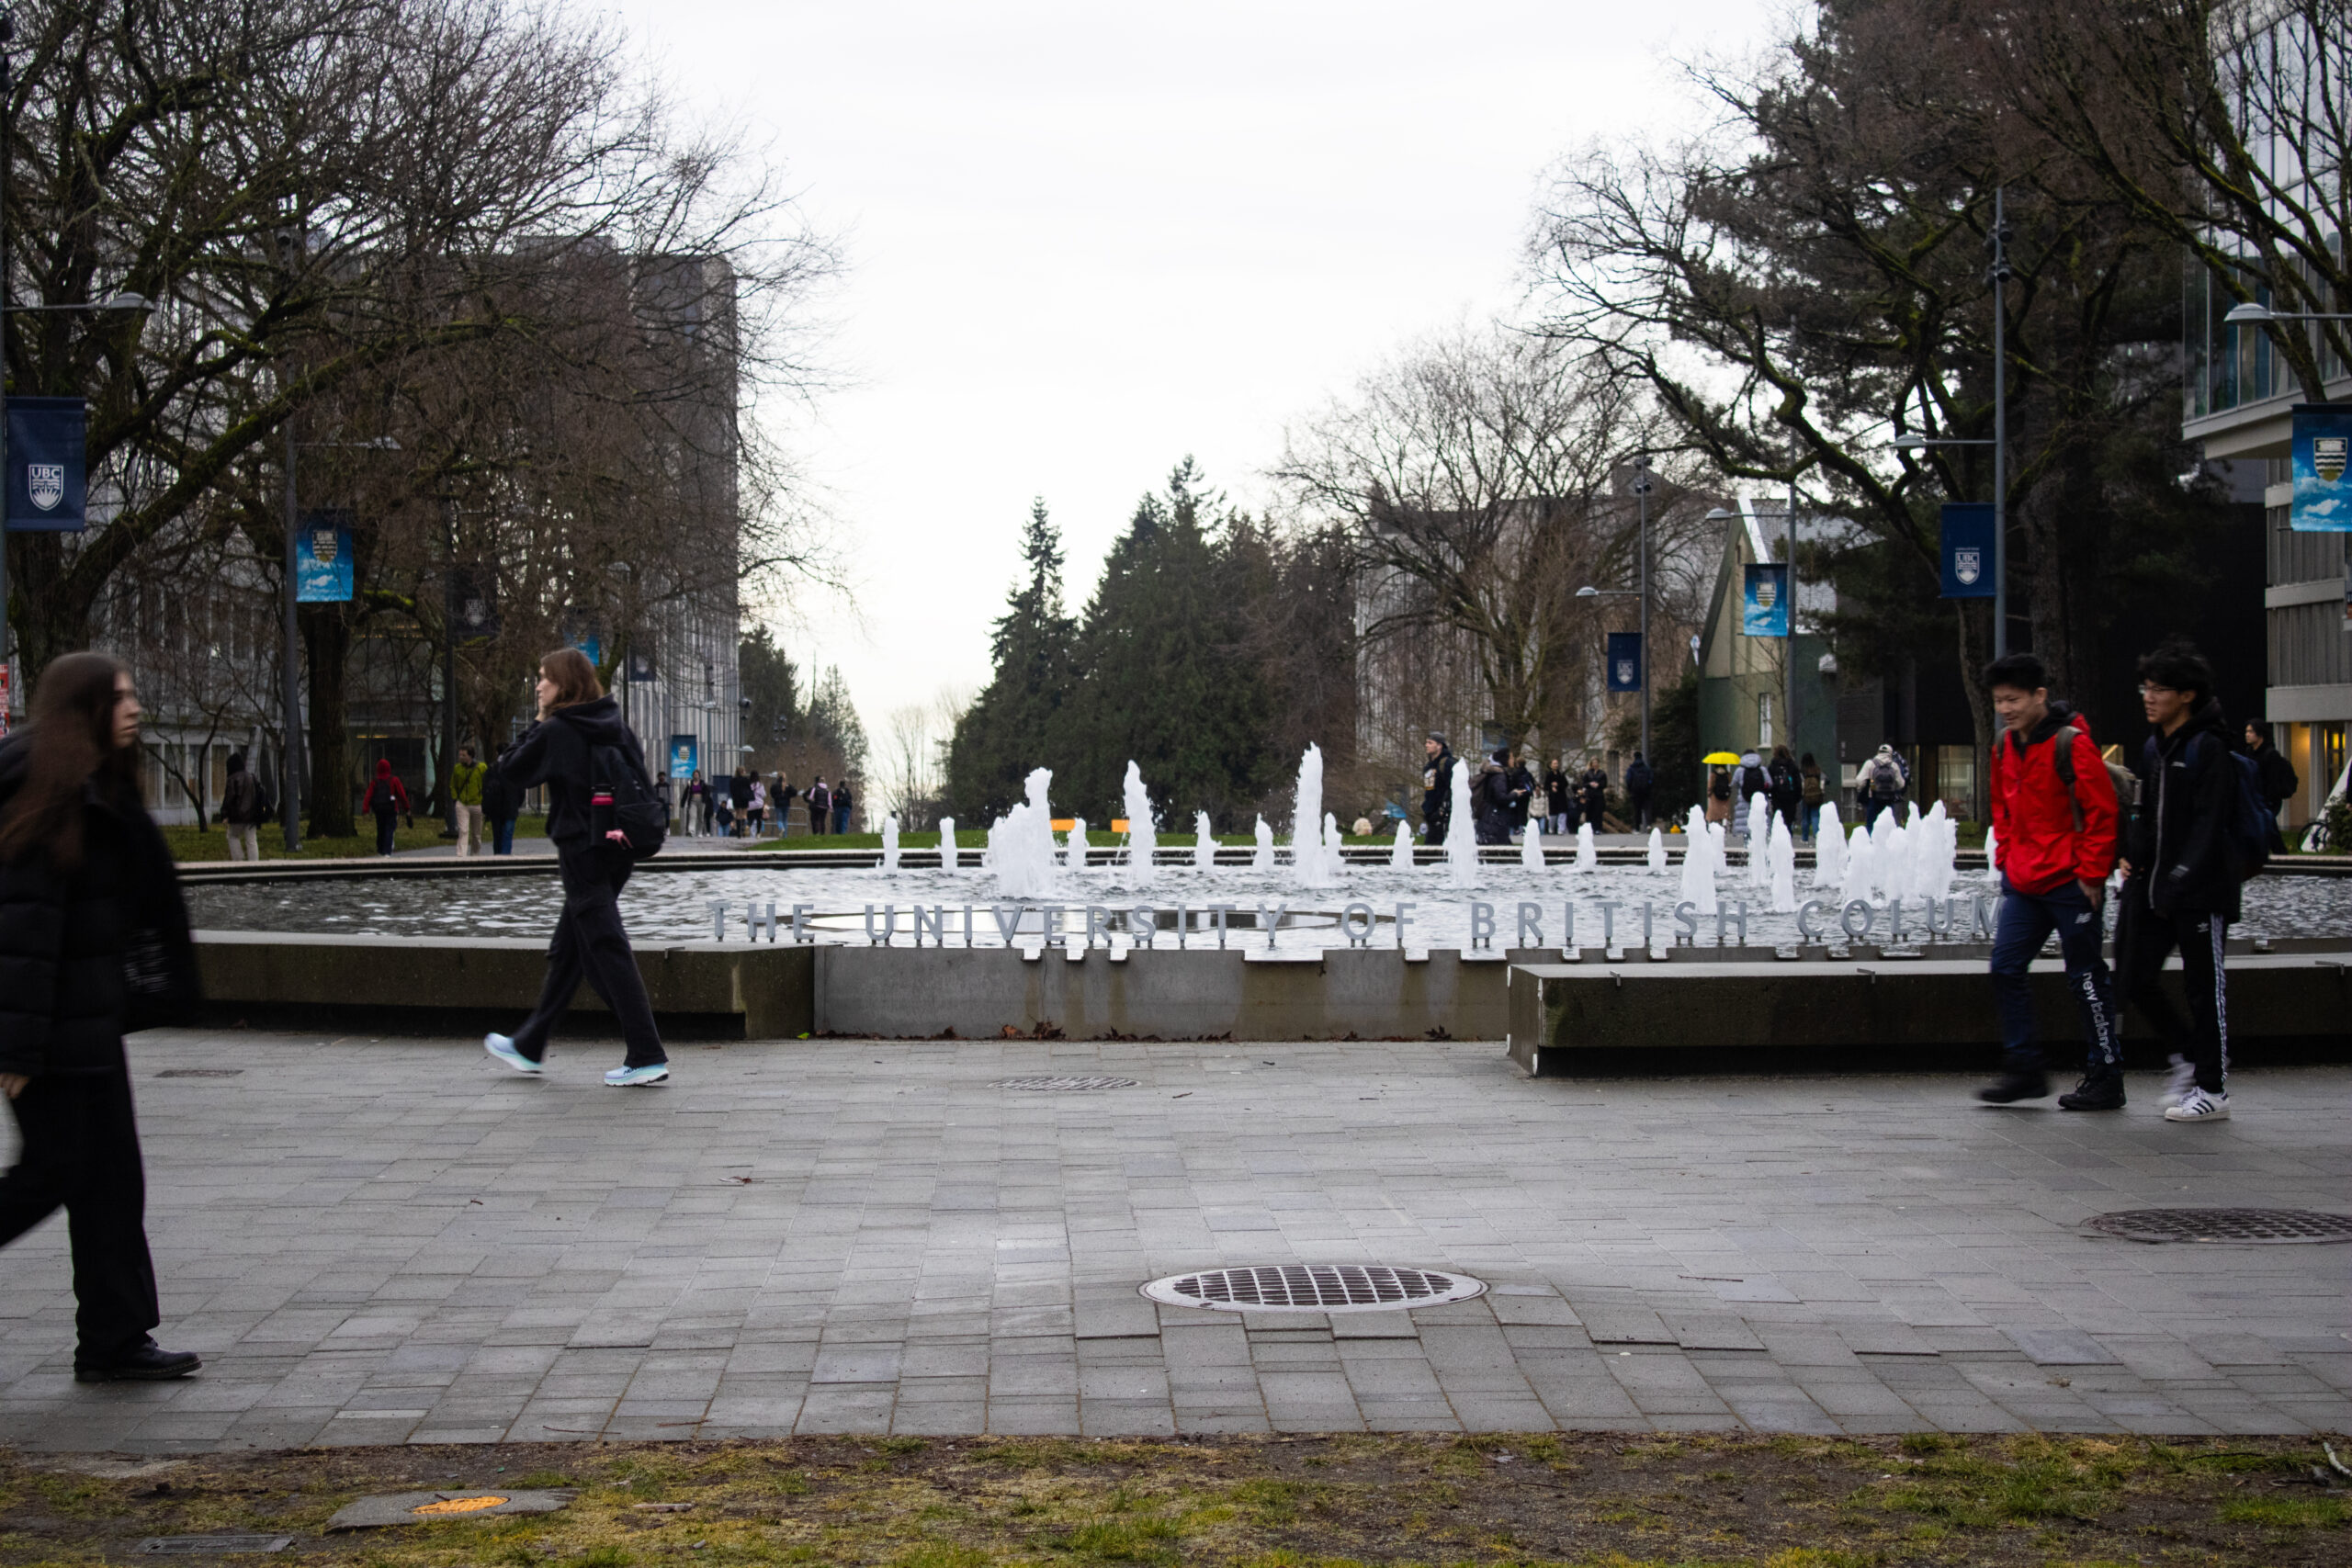 This is a photo of a large water fountain in the middle of a UBC courtyard. The fountain has the words “University of British Columbia” written around the outside. Students are walking around the courtyard.